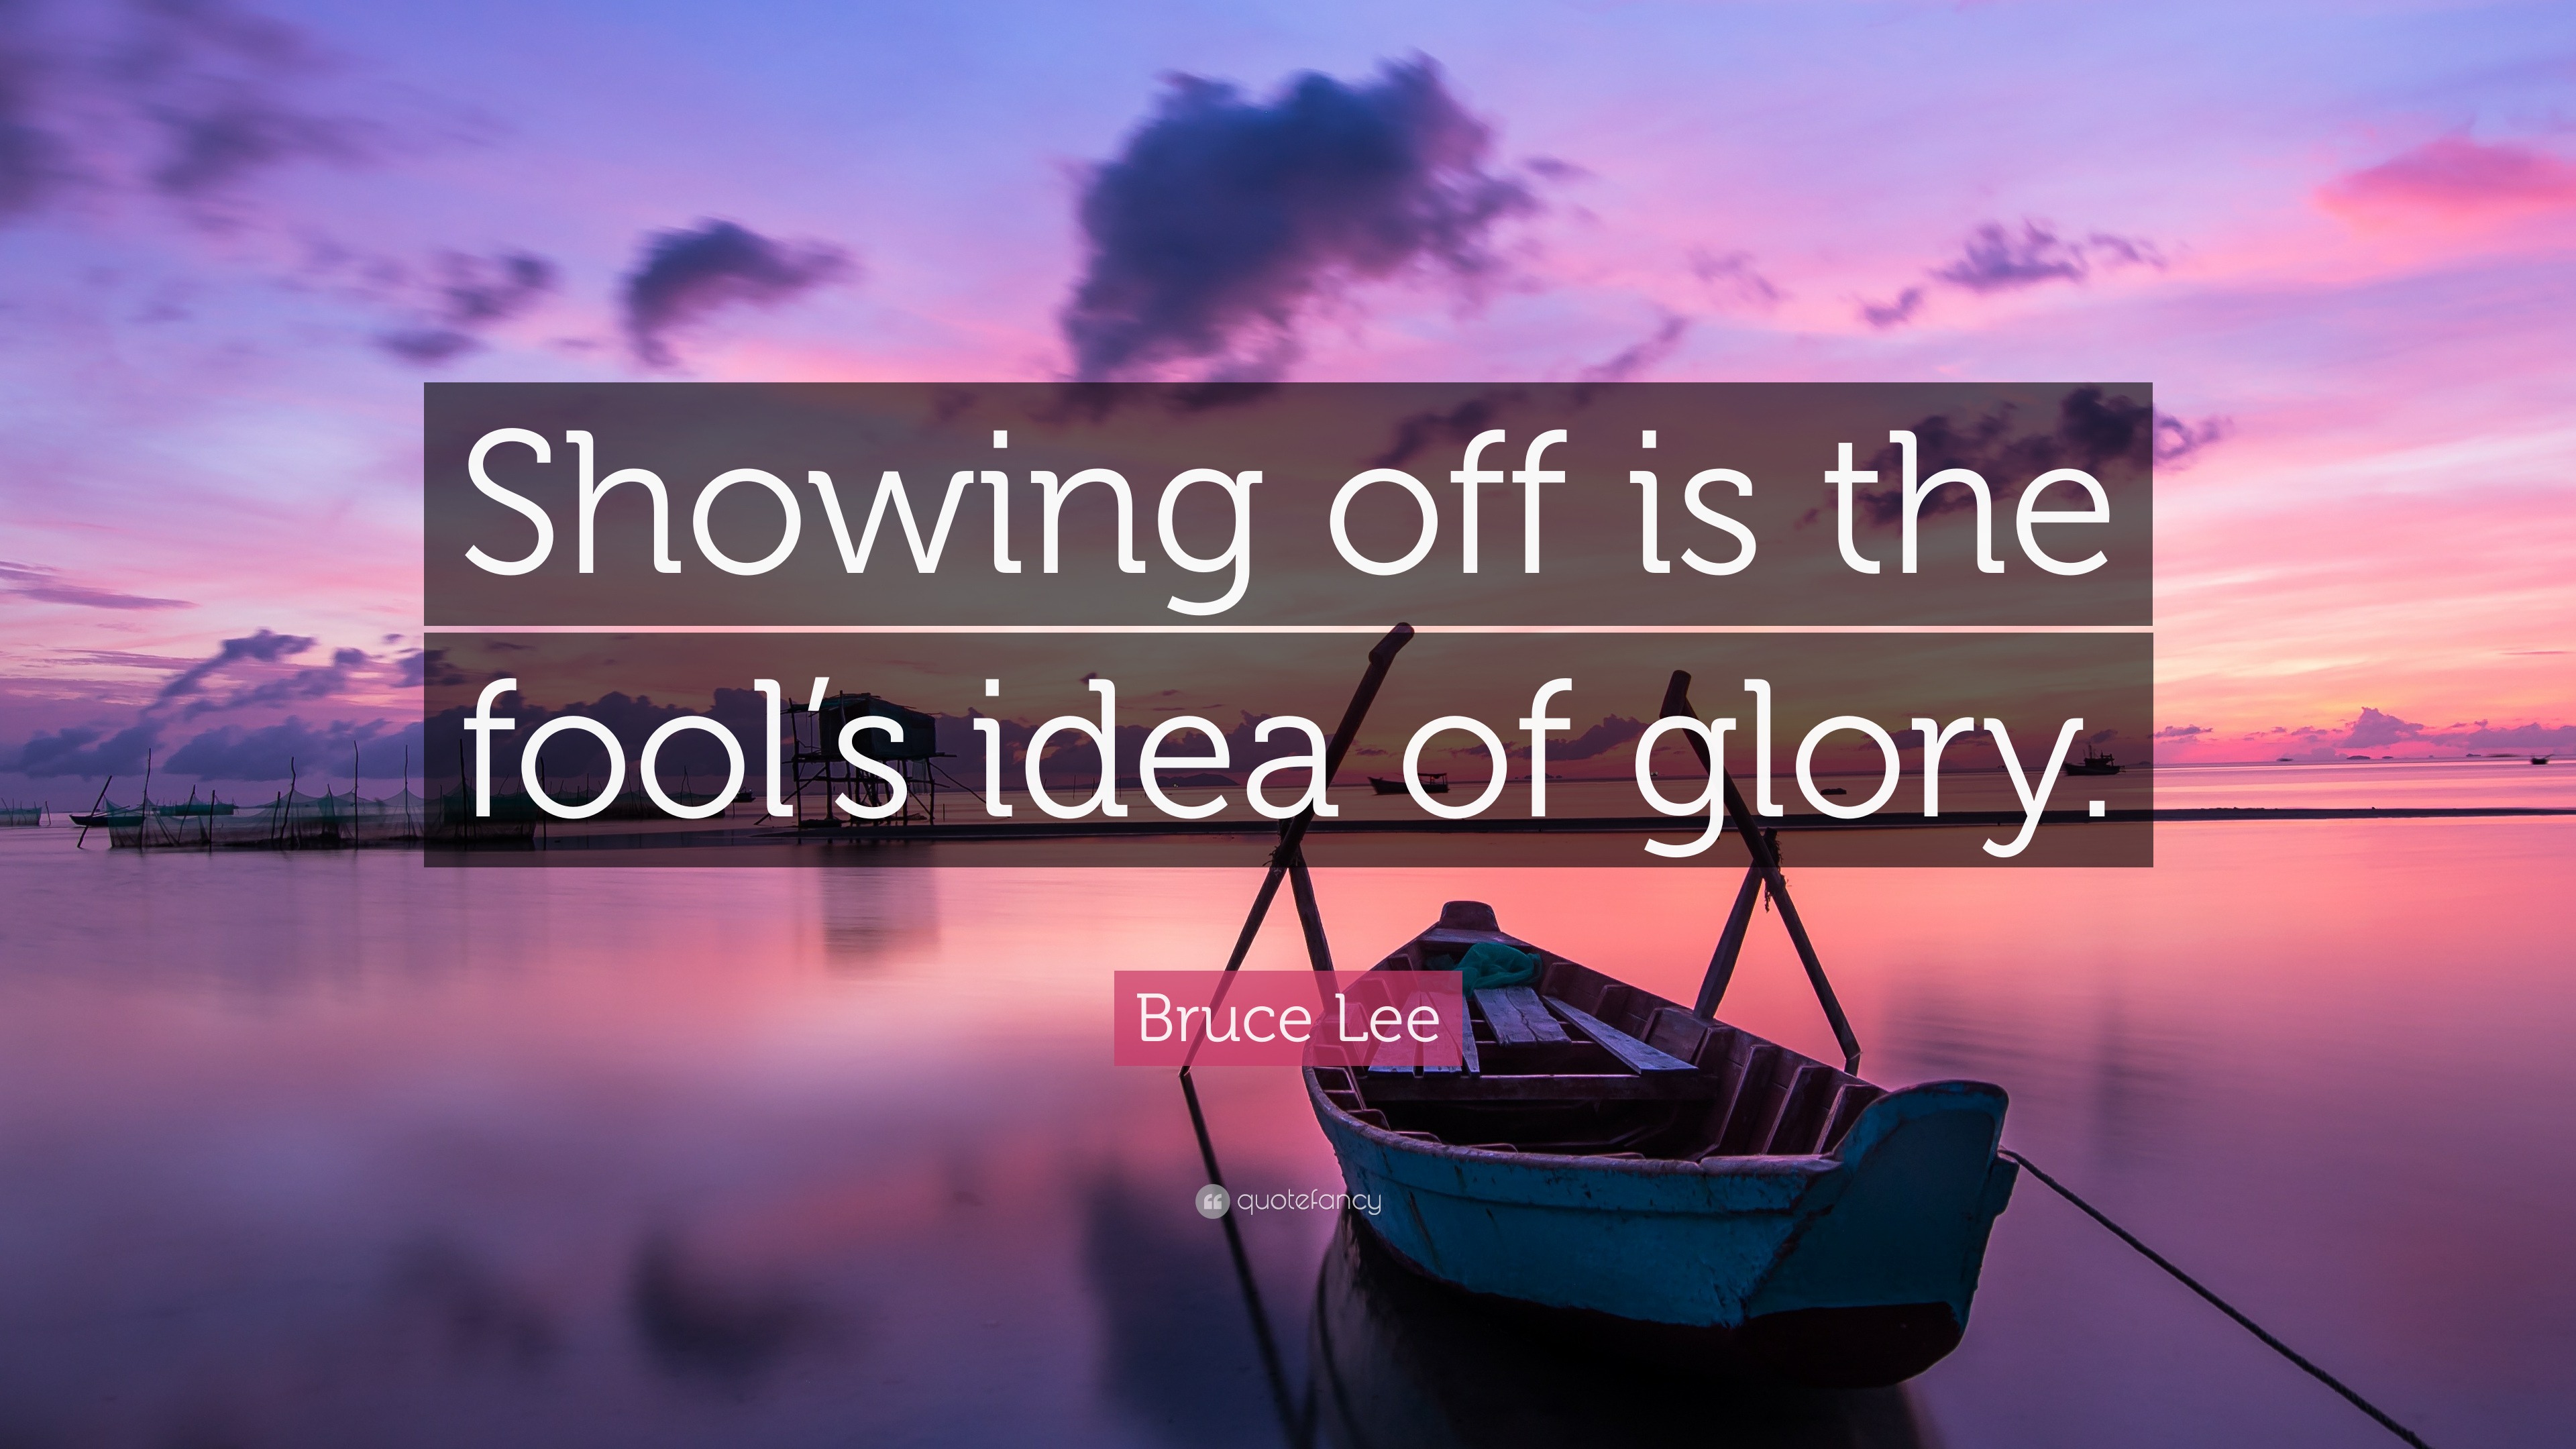 Bruce Lee Quote: “Showing off is the fool’s idea of glory.” (12